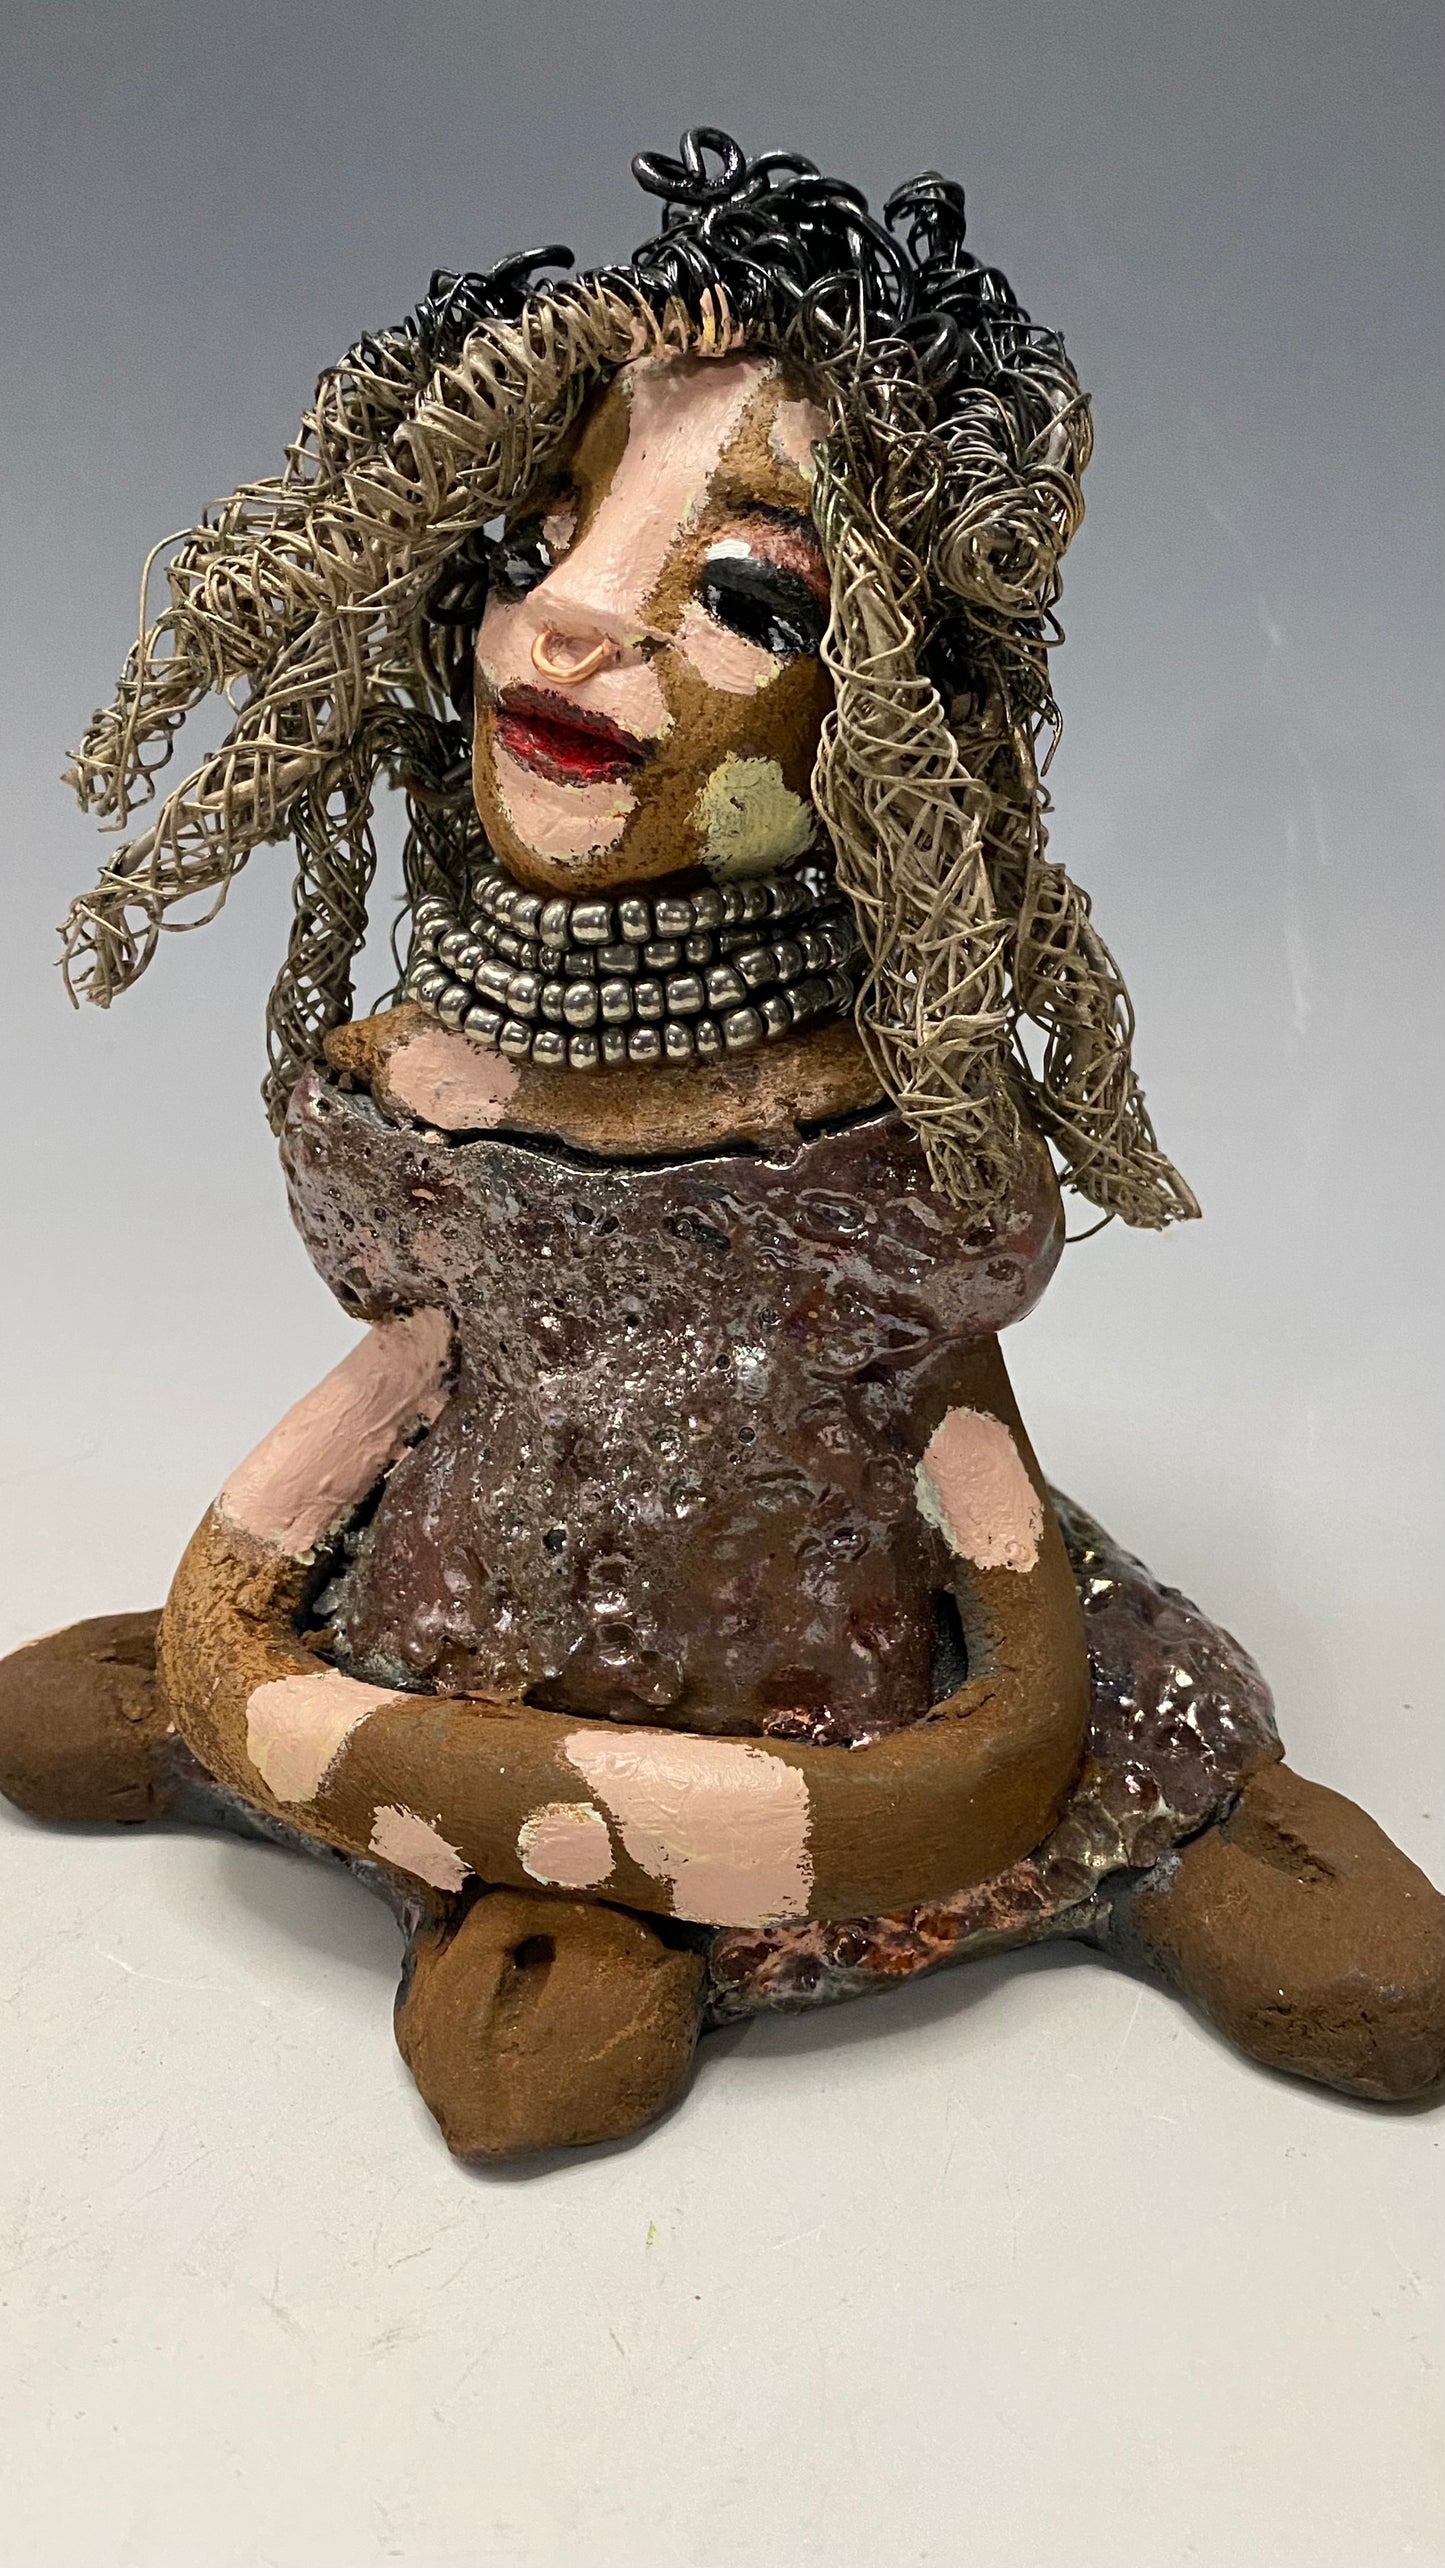 Anita stands 6.5" x 6" x 3" and weighs 1.3 lbs., with vitiligo. She loves the skin she's in! Her lips are painted with a warm ruby red, and long twisted white and gold wire locs that extend to her waist give her a unique style. Her dress is finished with a copper-antique glaze and over 75 feet of 16 and 24 gauge wire. Her bright eyes evoke a sense of hope. Add Anita to your family and she'll sure to be a conversation starter. Have questions? Ask away!